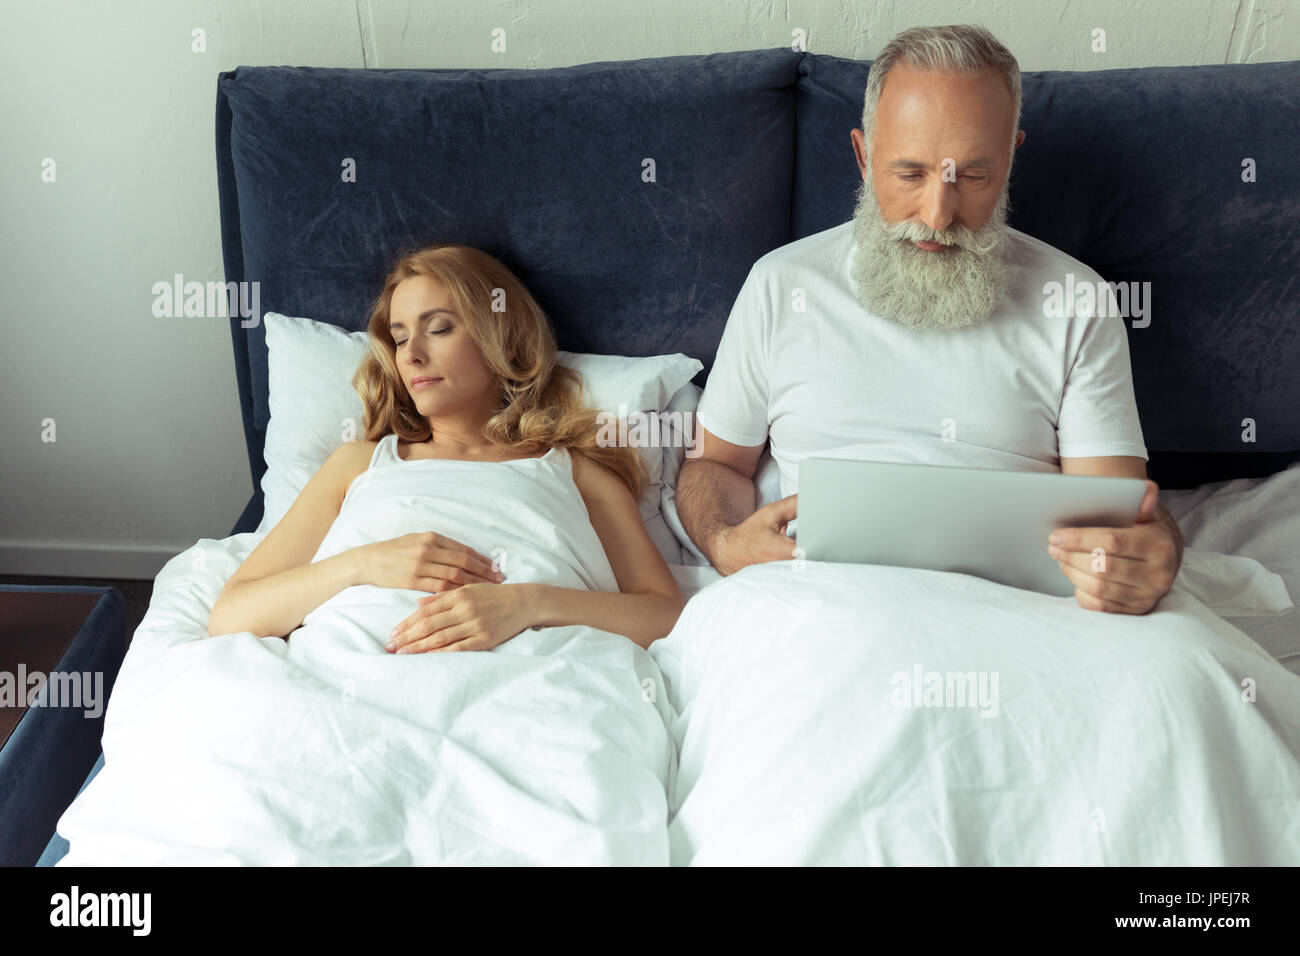 Bearded man using laptop in bed alors que blonde woman sleeping Banque D'Images